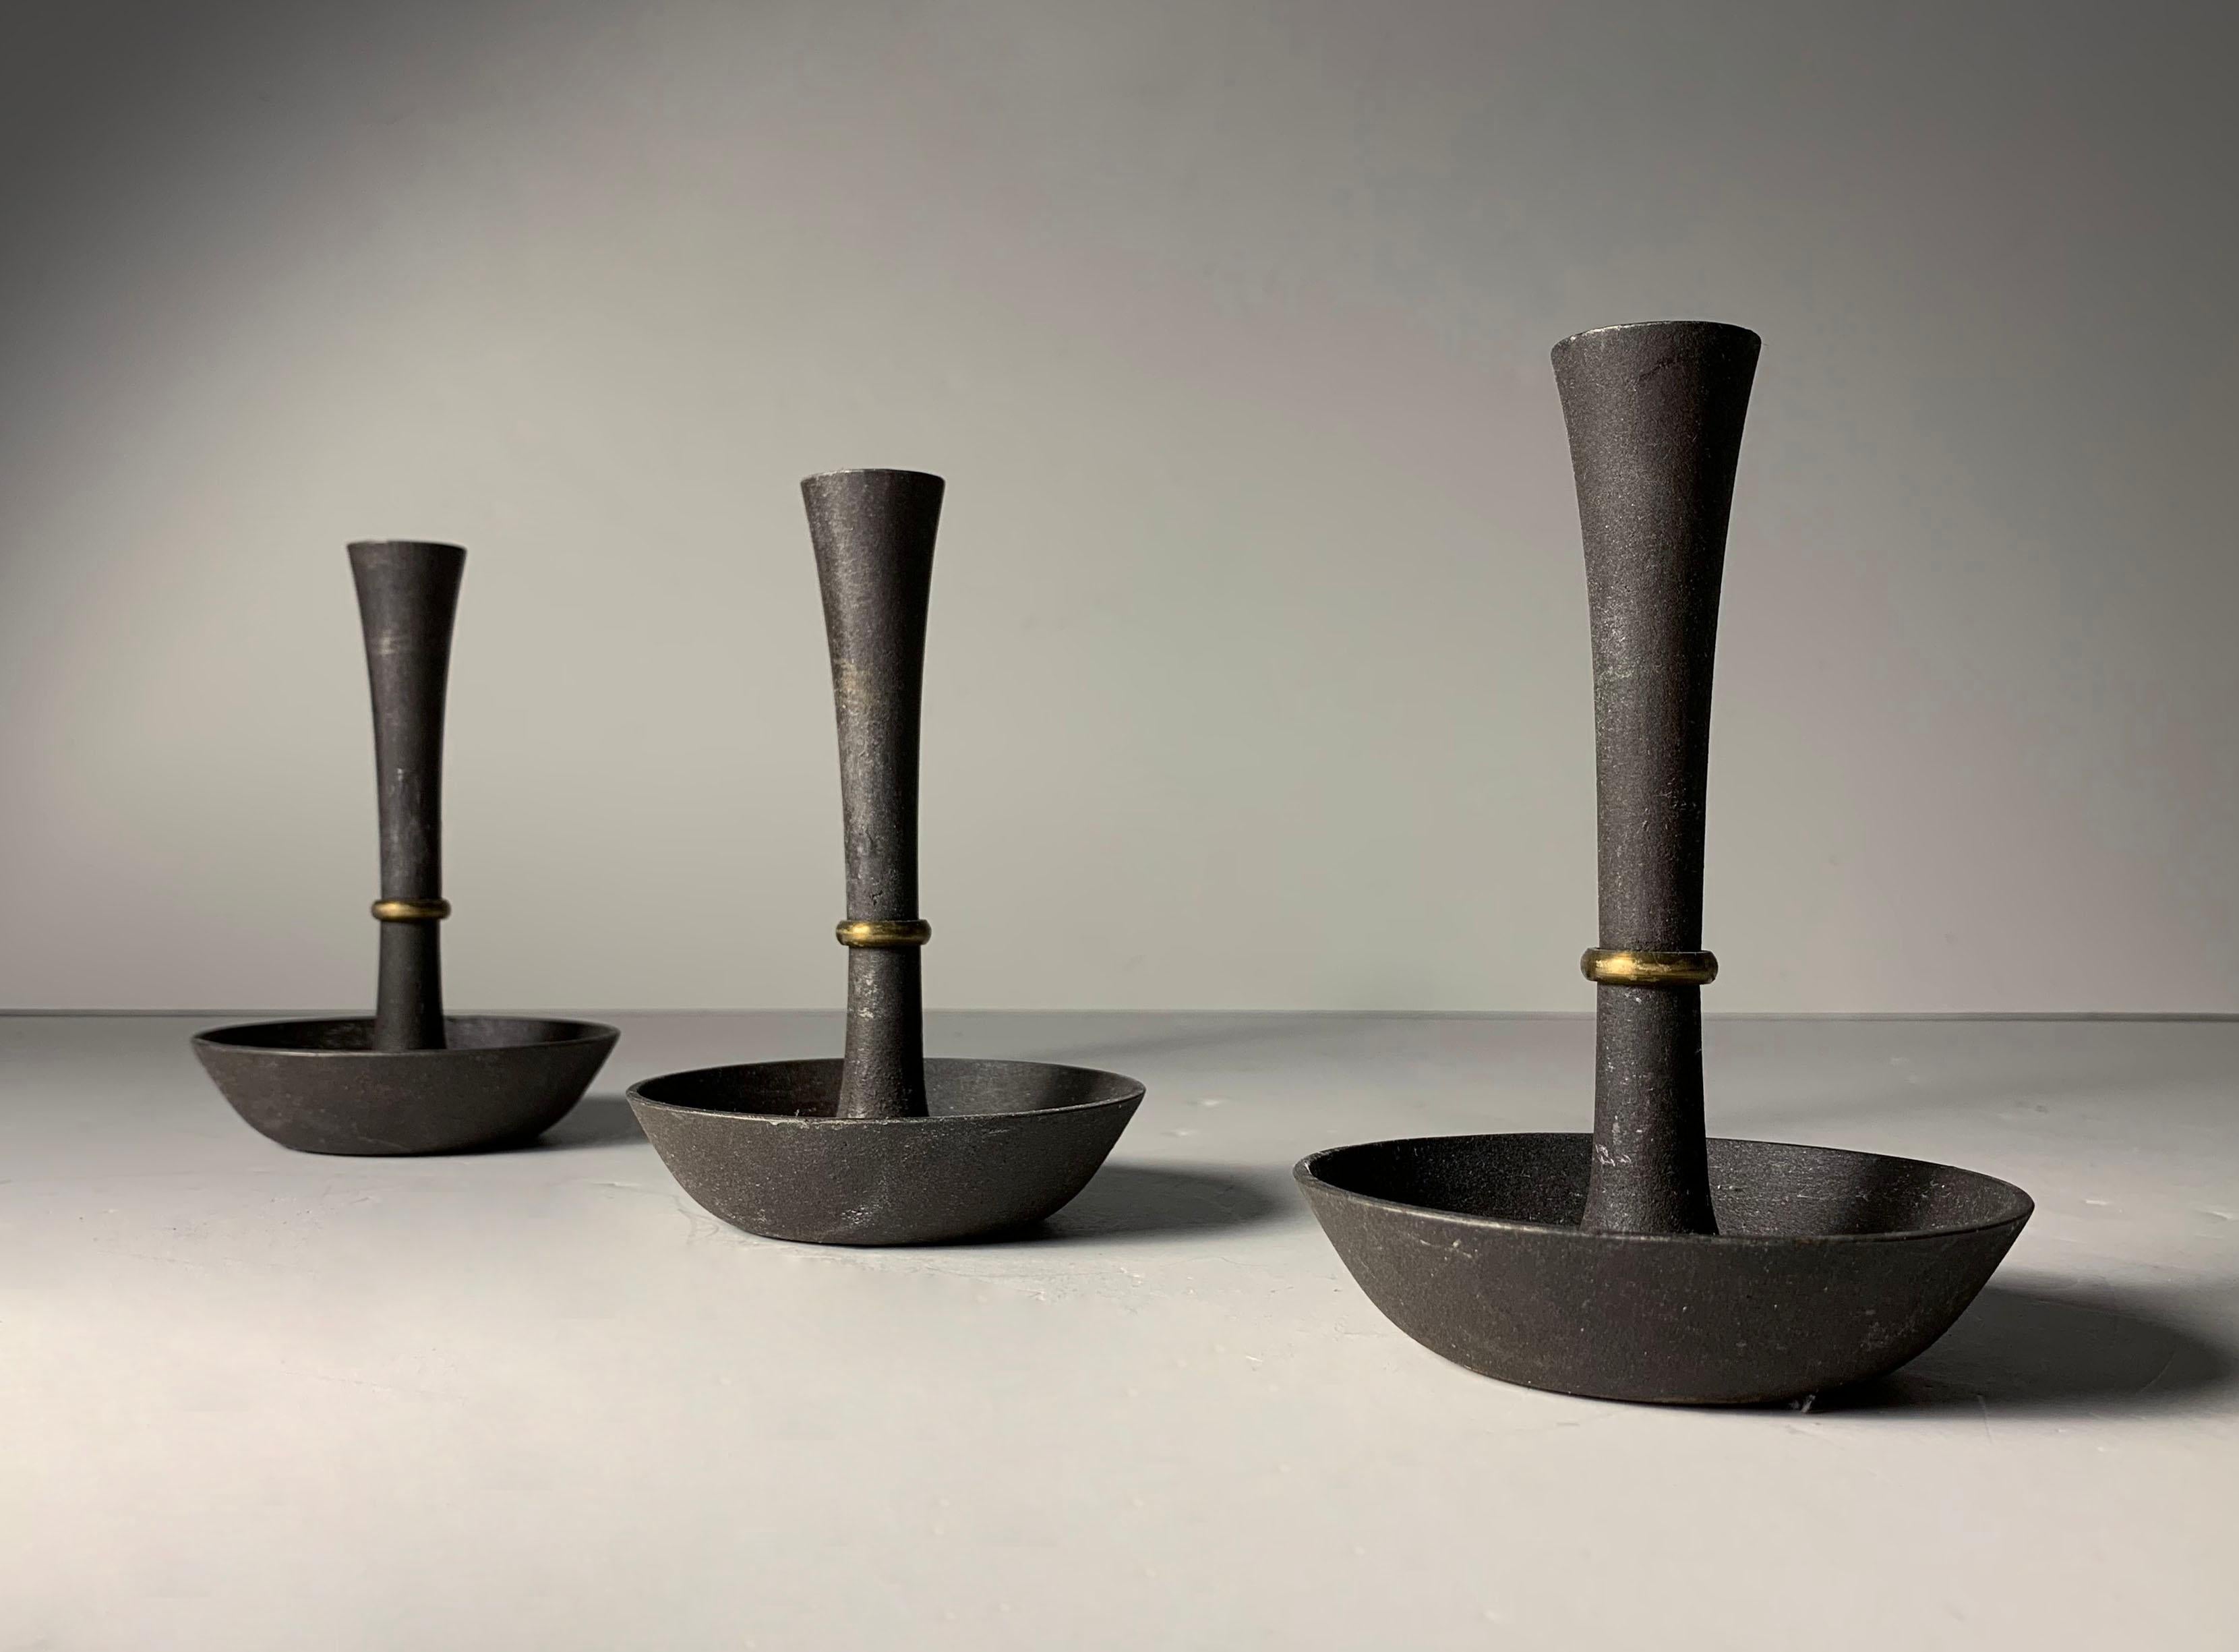 Dansk iron and brass candle holders by Jens Quistgaard

Set of 3.